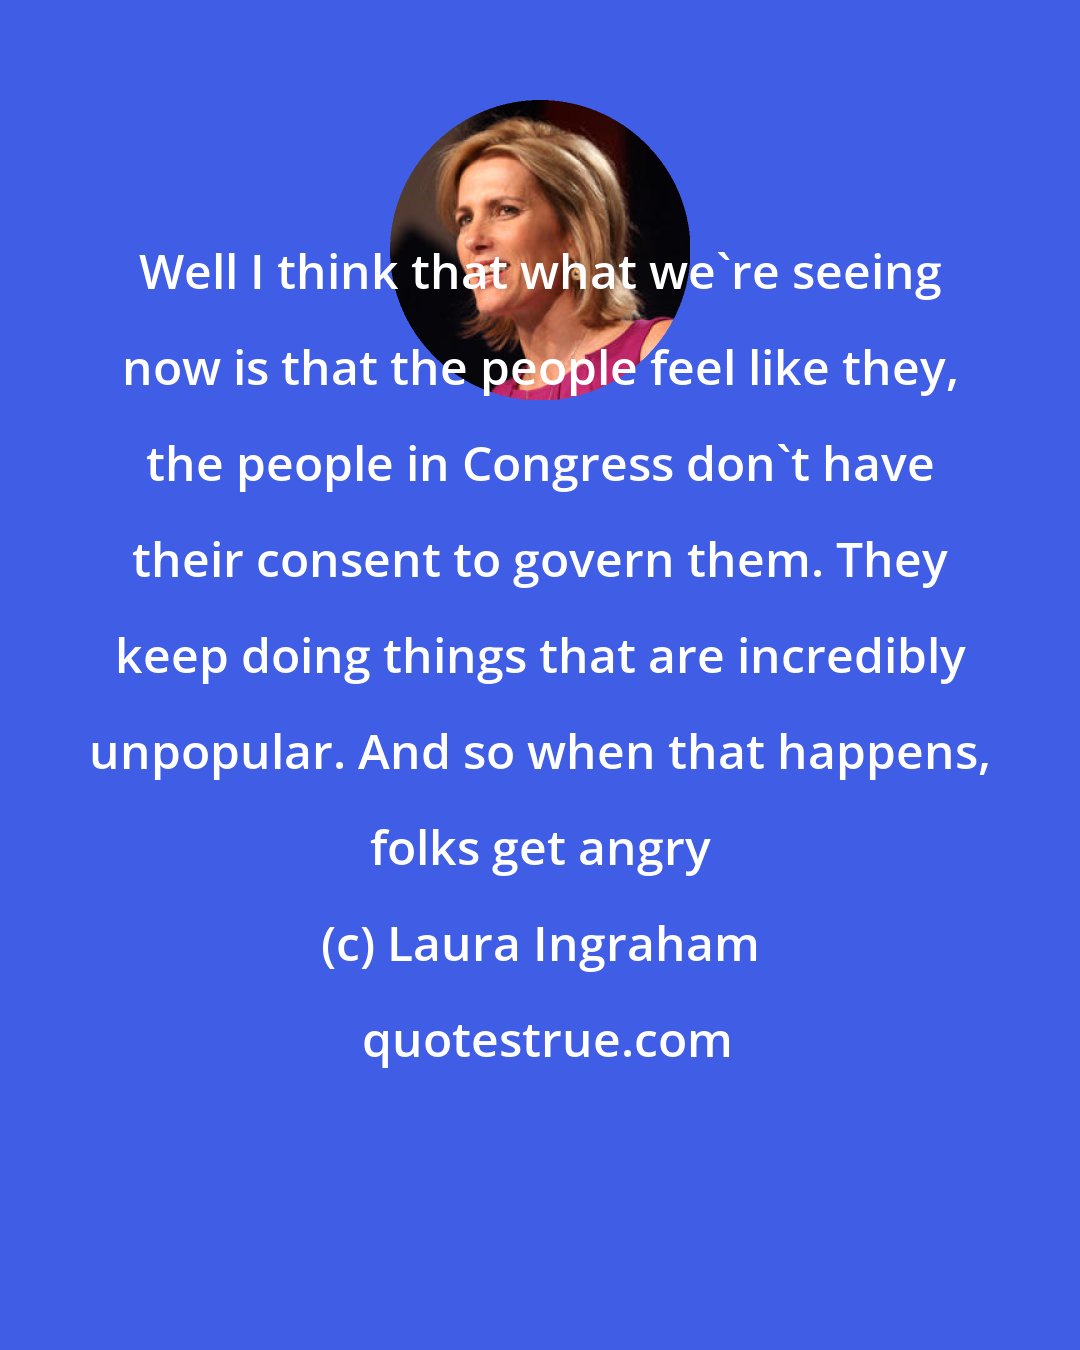 Laura Ingraham: Well I think that what we're seeing now is that the people feel like they, the people in Congress don't have their consent to govern them. They keep doing things that are incredibly unpopular. And so when that happens, folks get angry